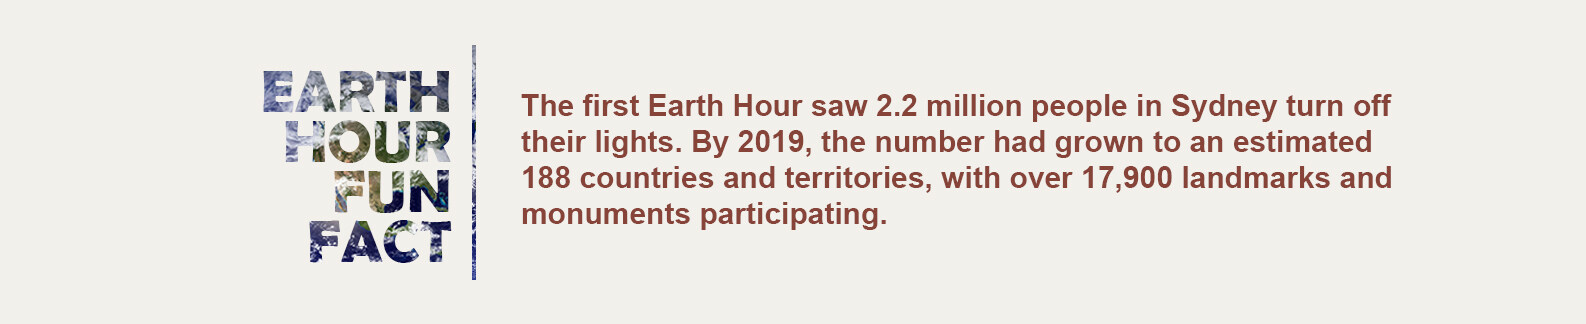 The first Earth Hour saw 2.2 million people and 2000 businesses in Sydney turn off their lights. By 2019, the number had grown to an estimated 188 countries and territories, with over 17,900 landmarks and monuments participating.